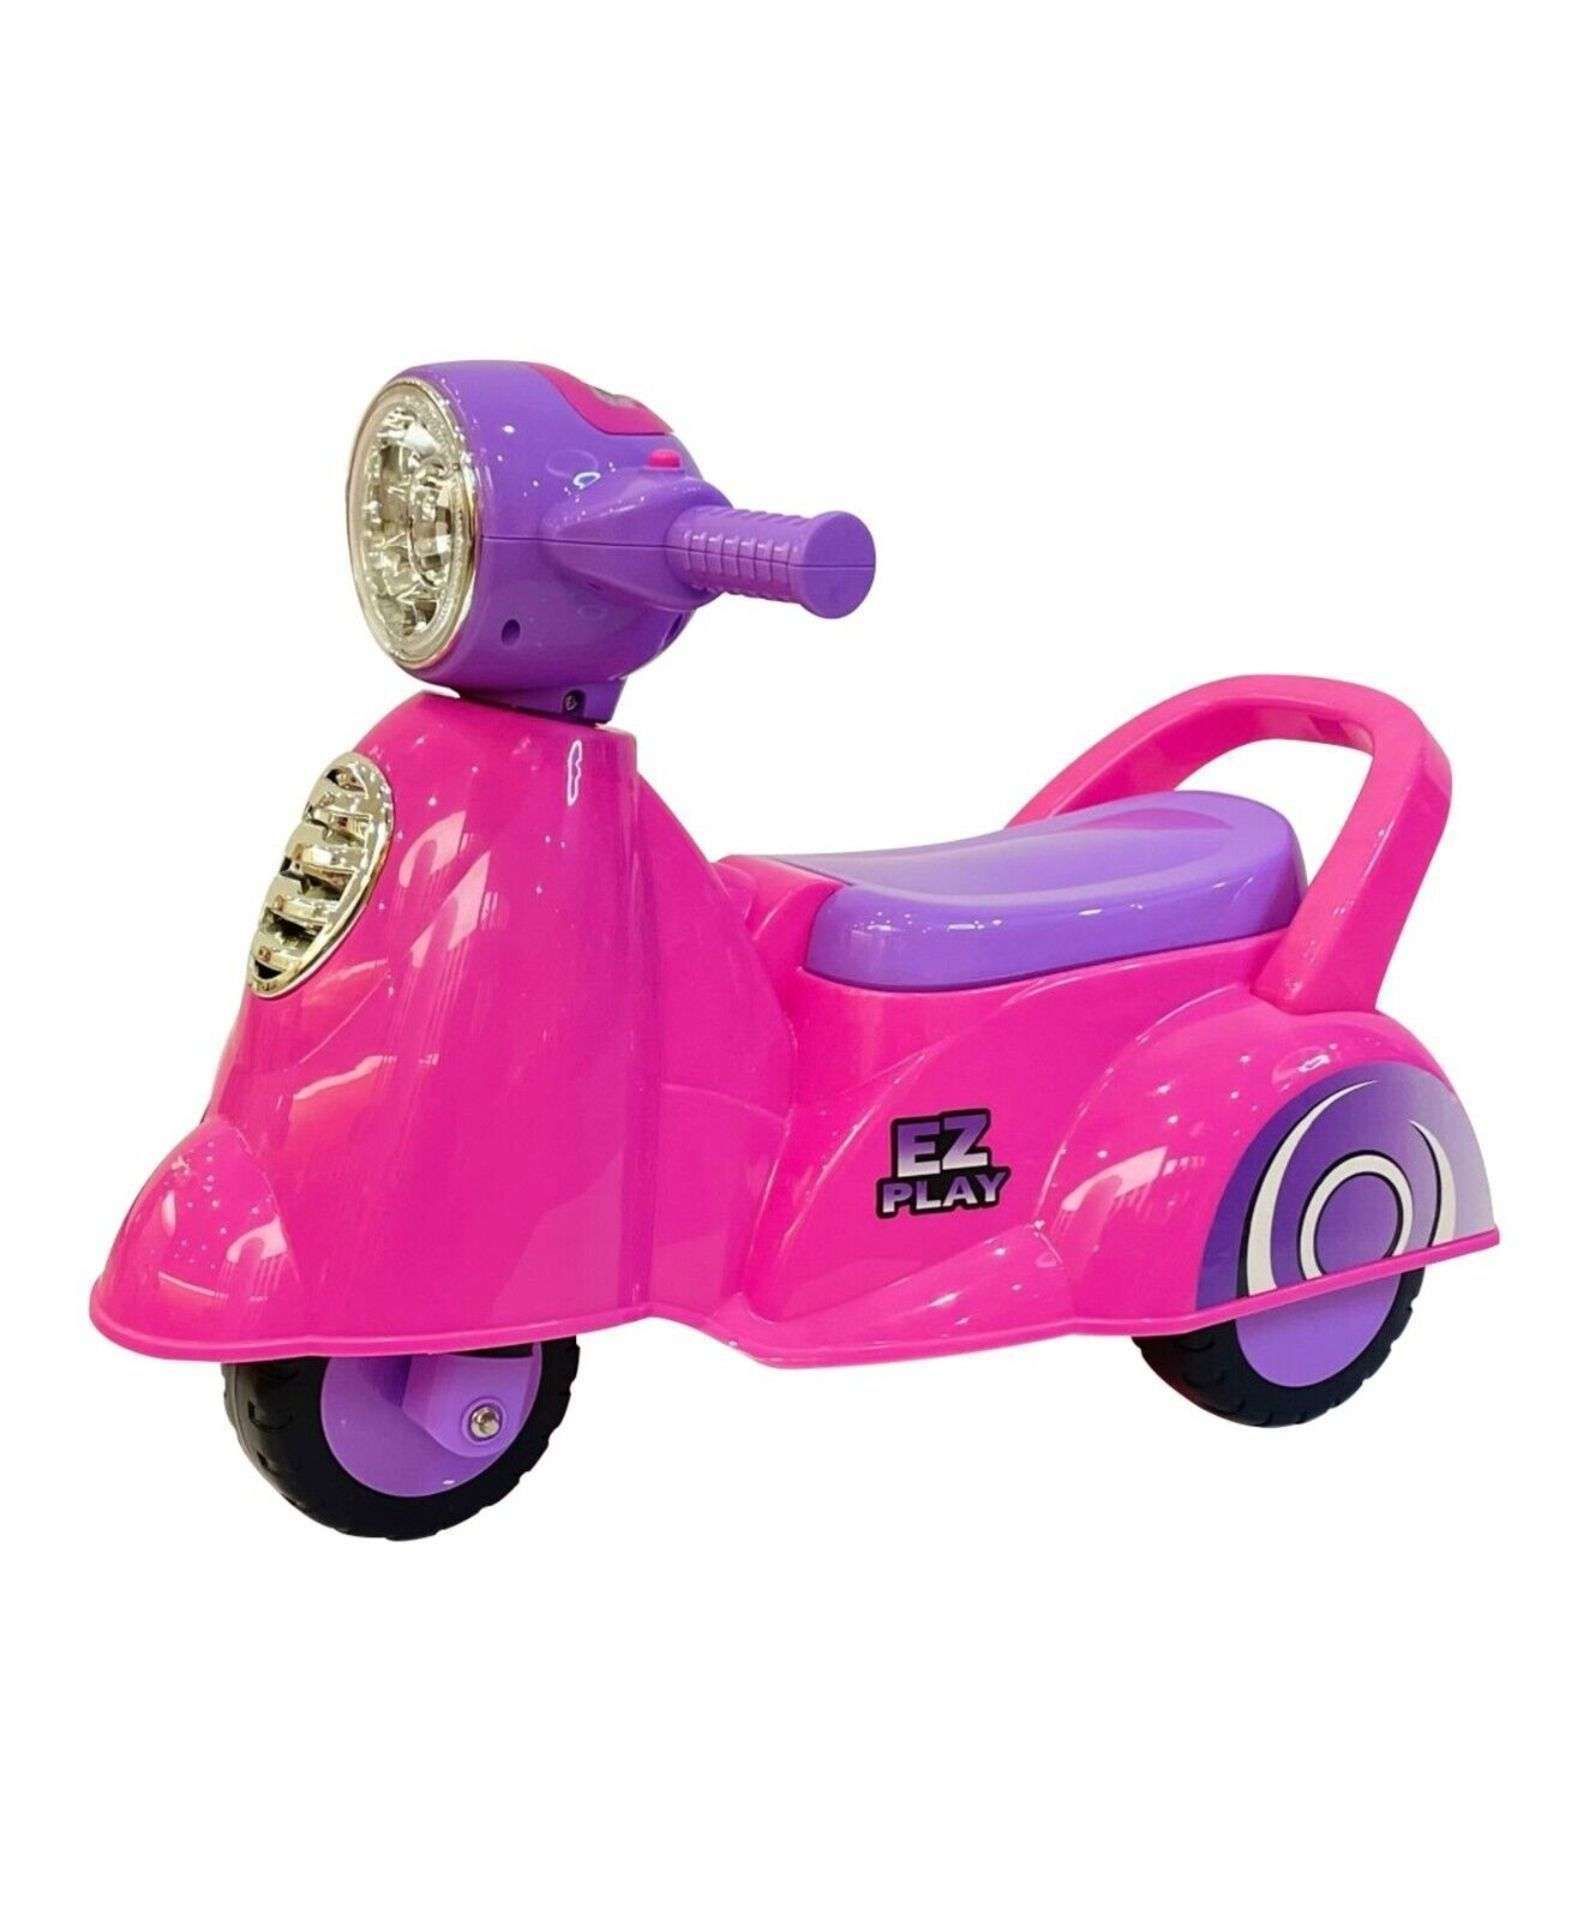 2 X BRAND NEW RICCO TOYS PINK CHILDRENS RIDE ON SCOOTERS R6-1